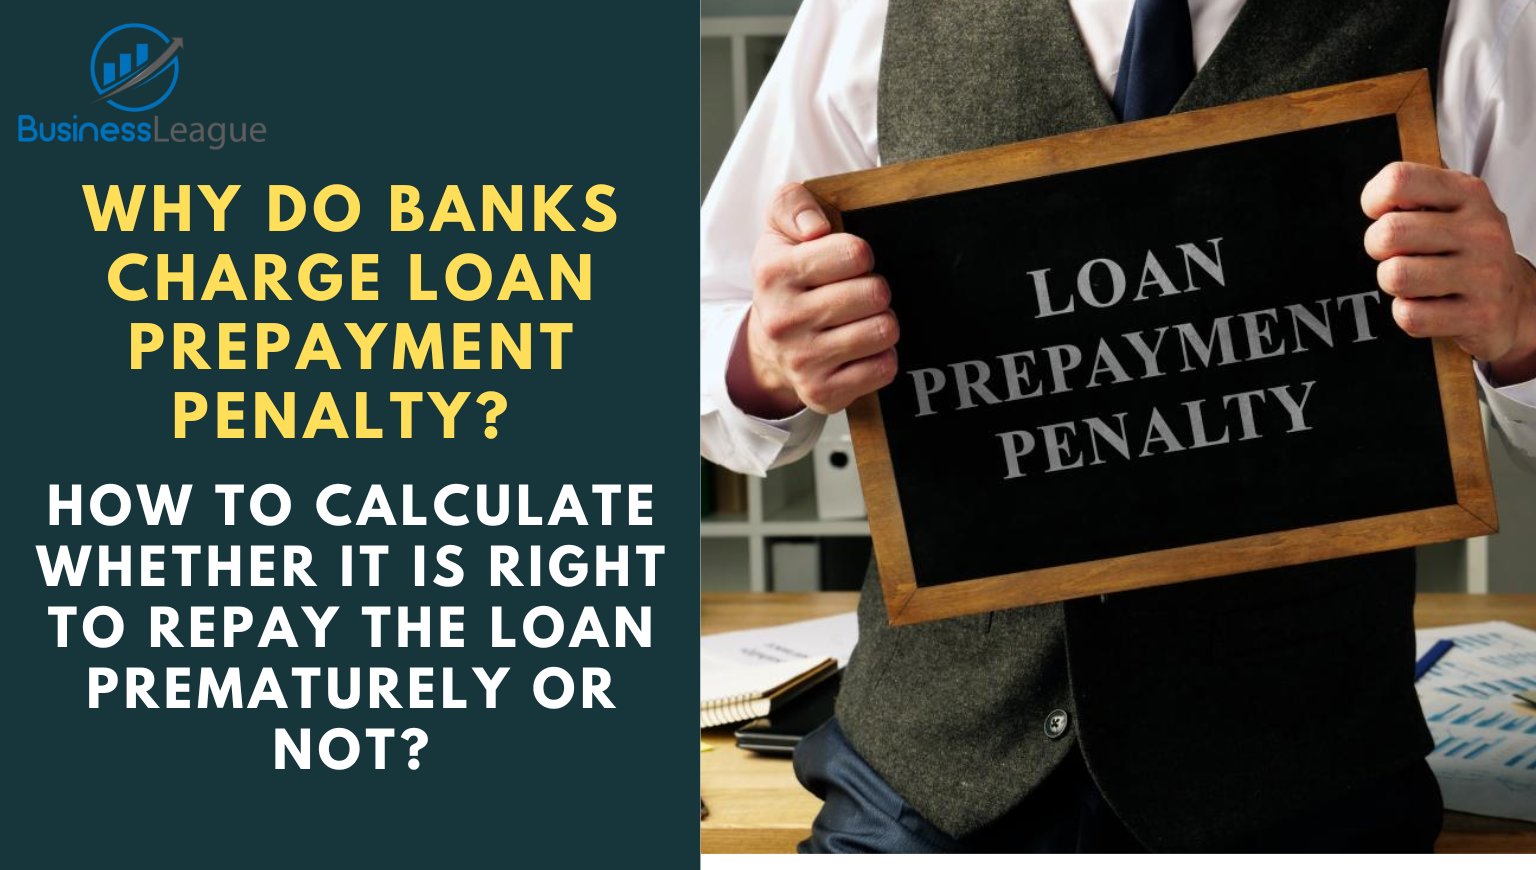 Why do banks charge Loan Prepayment Penalty? How to calculate whether it is right to repay the loan prematurely or not?